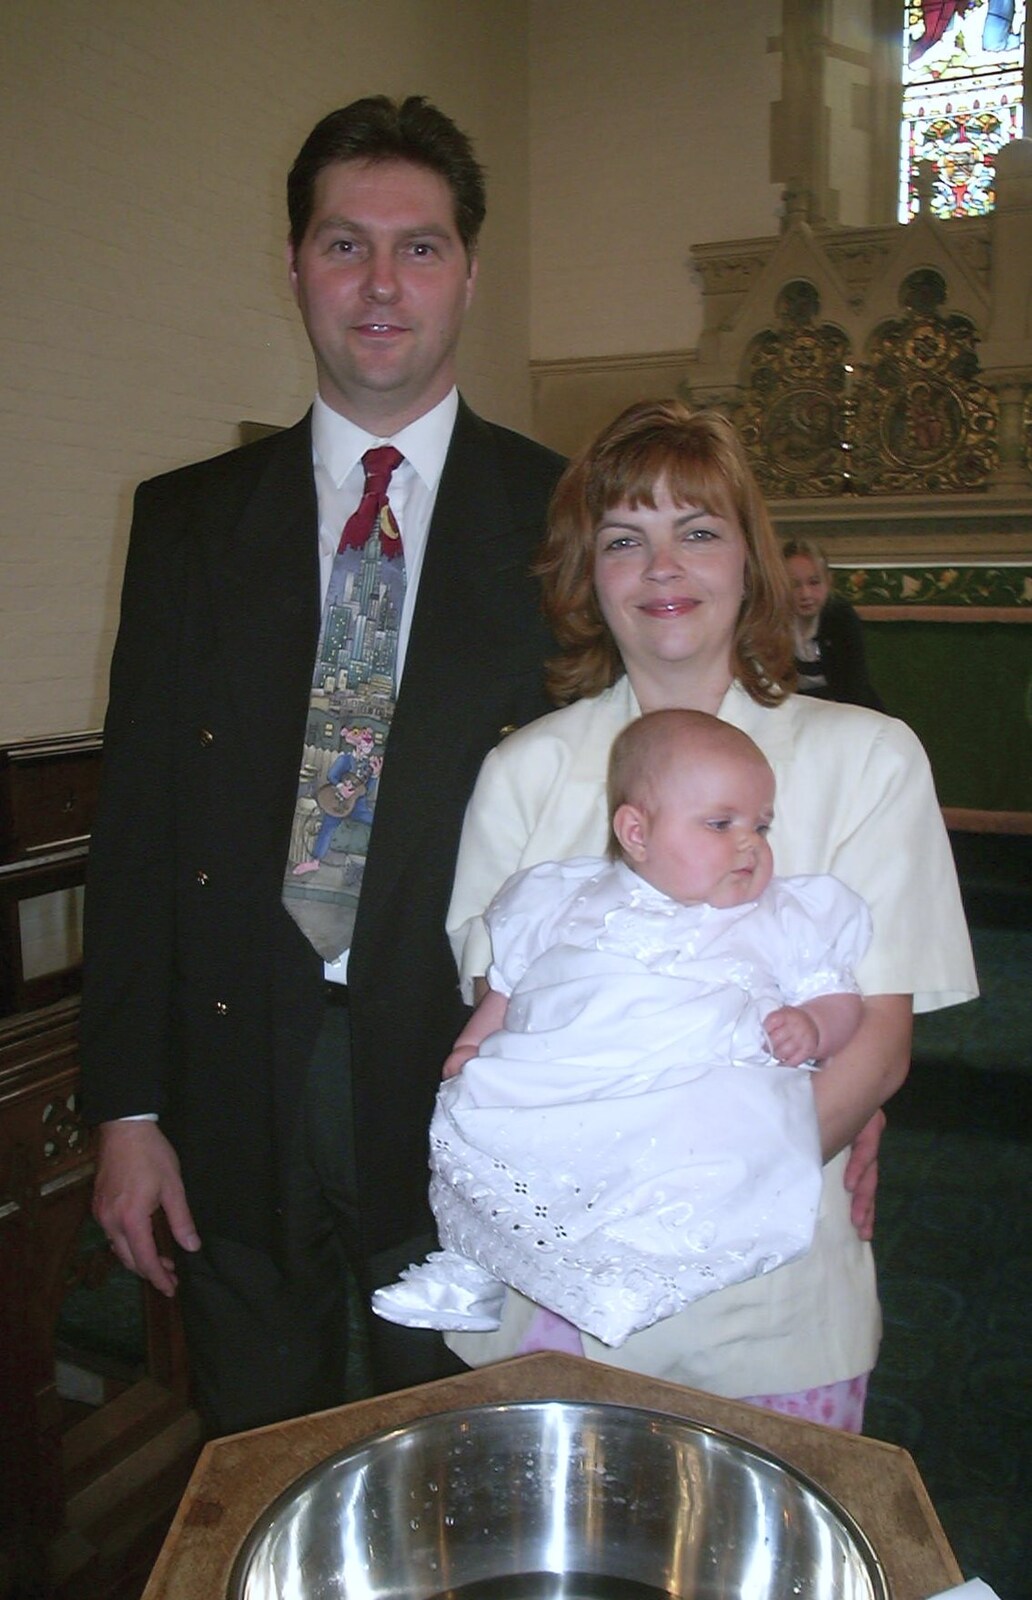 Sean, Michelle and the baby Sydney from Sydney's Christening, Hordle, Hampshire - 4th May 2002